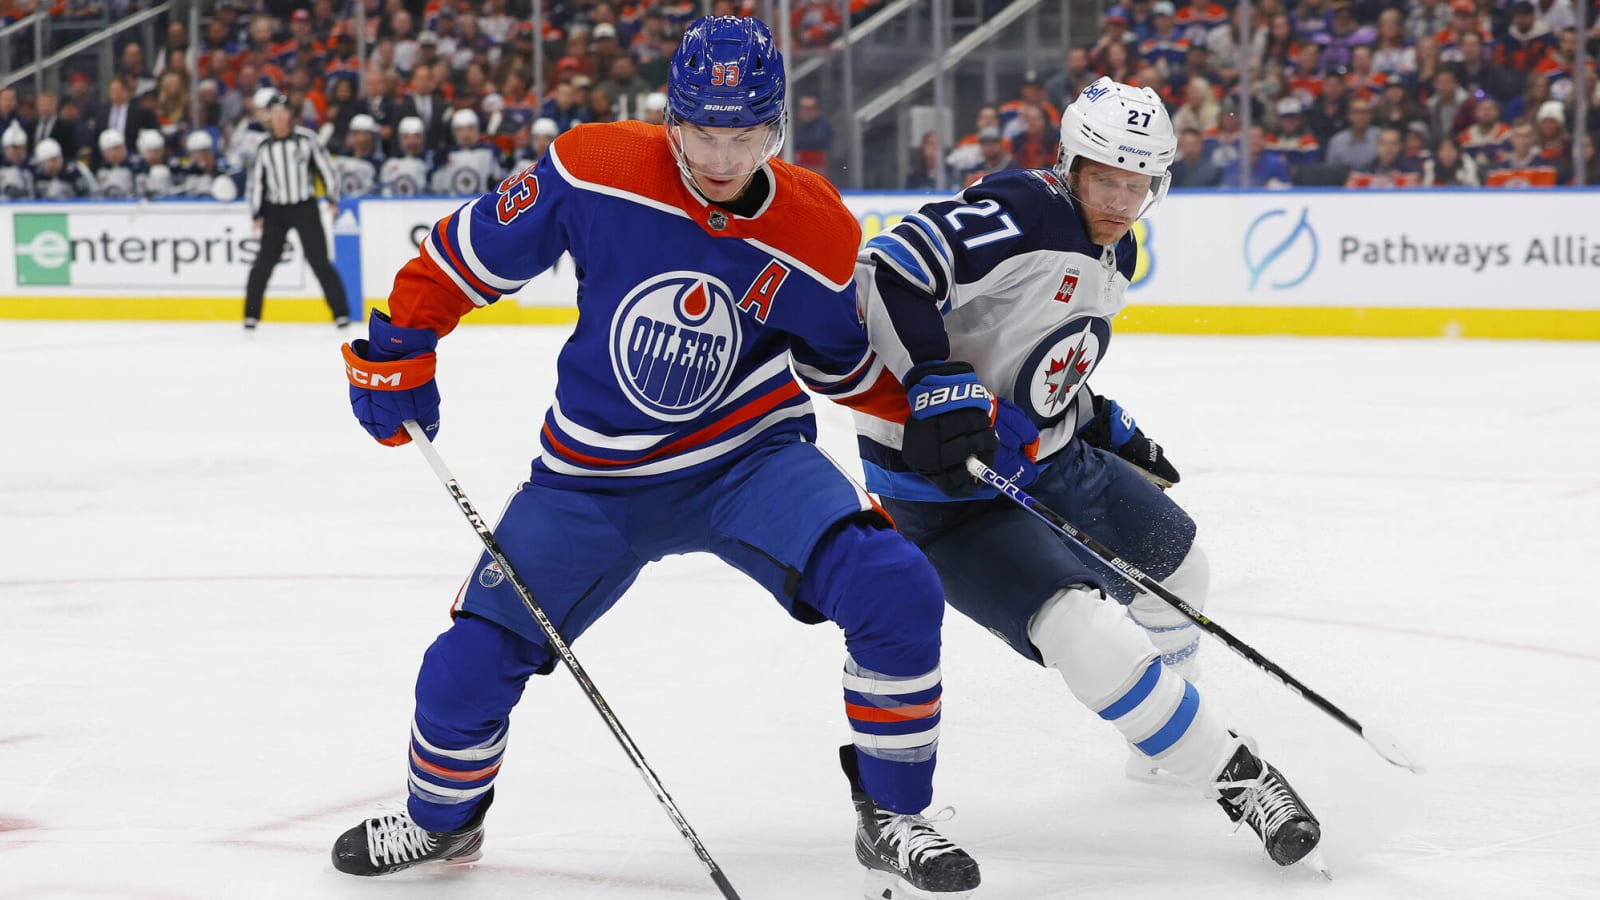 Illness leaves Ryan Nugent-Hopkins questionable for Edmonton Oilers game against Boston Bruins